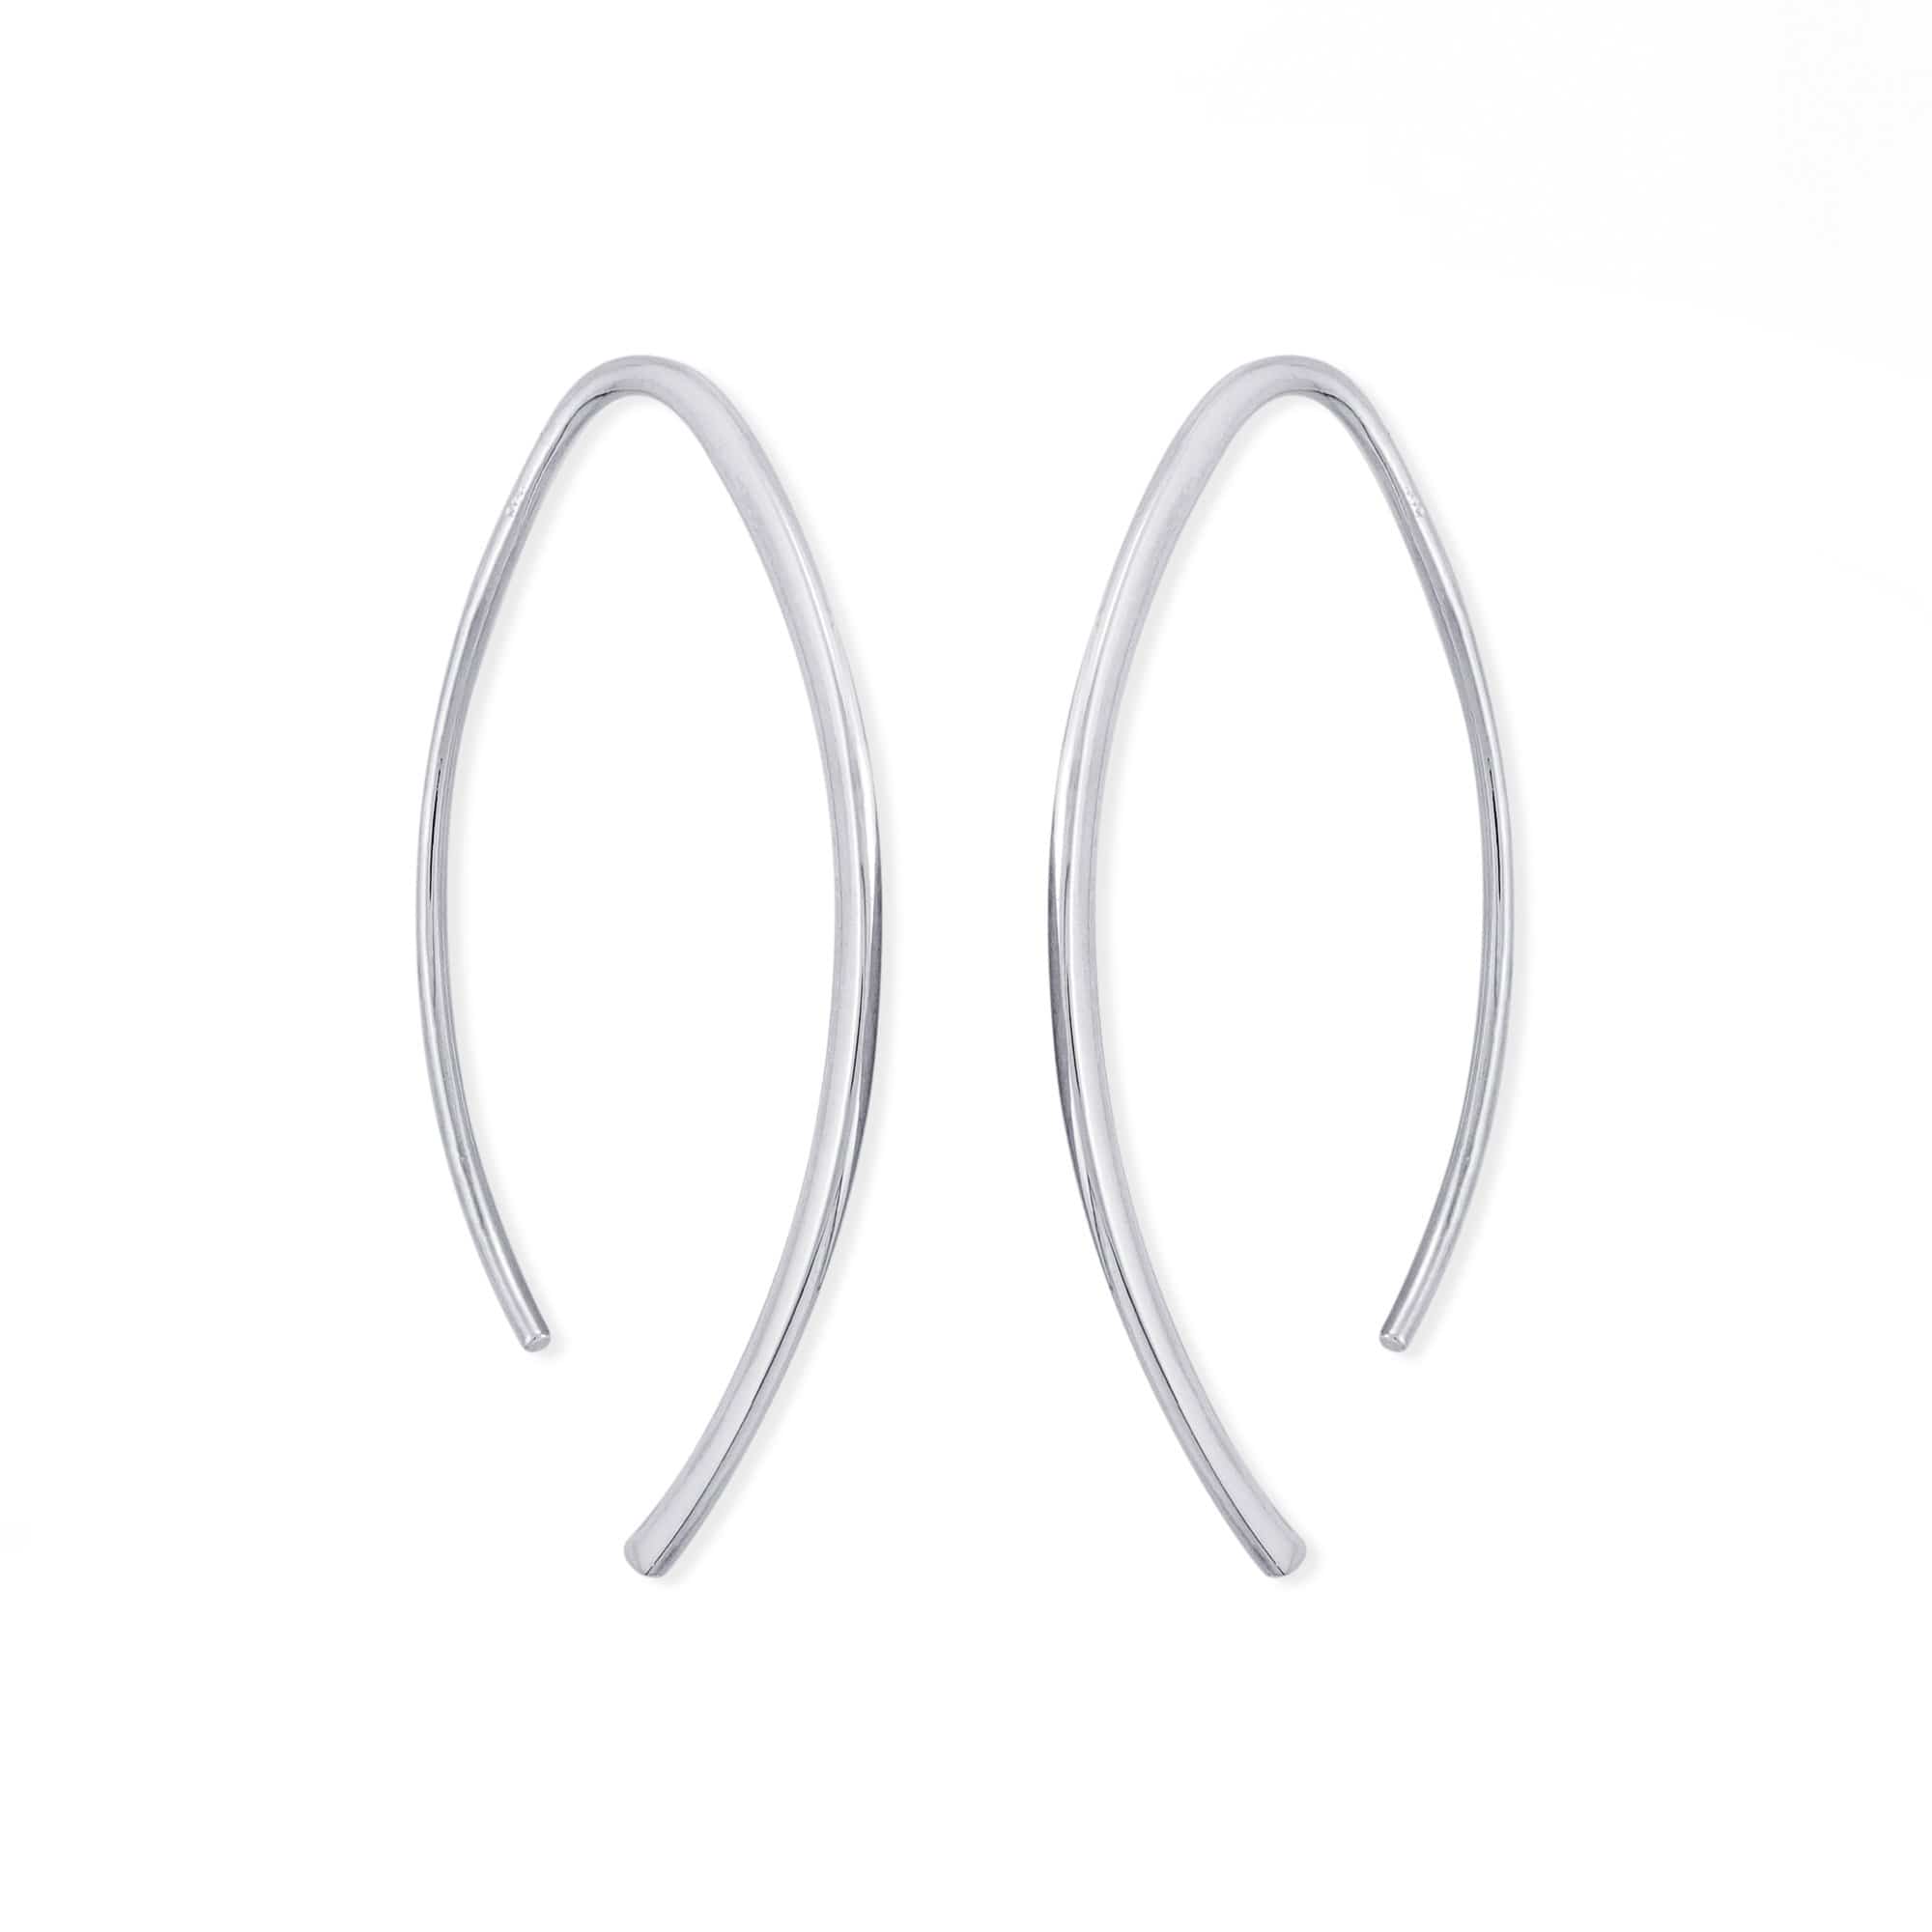 Boma Jewelry Earrings Sterling Silver Curved Pull Through Hoops